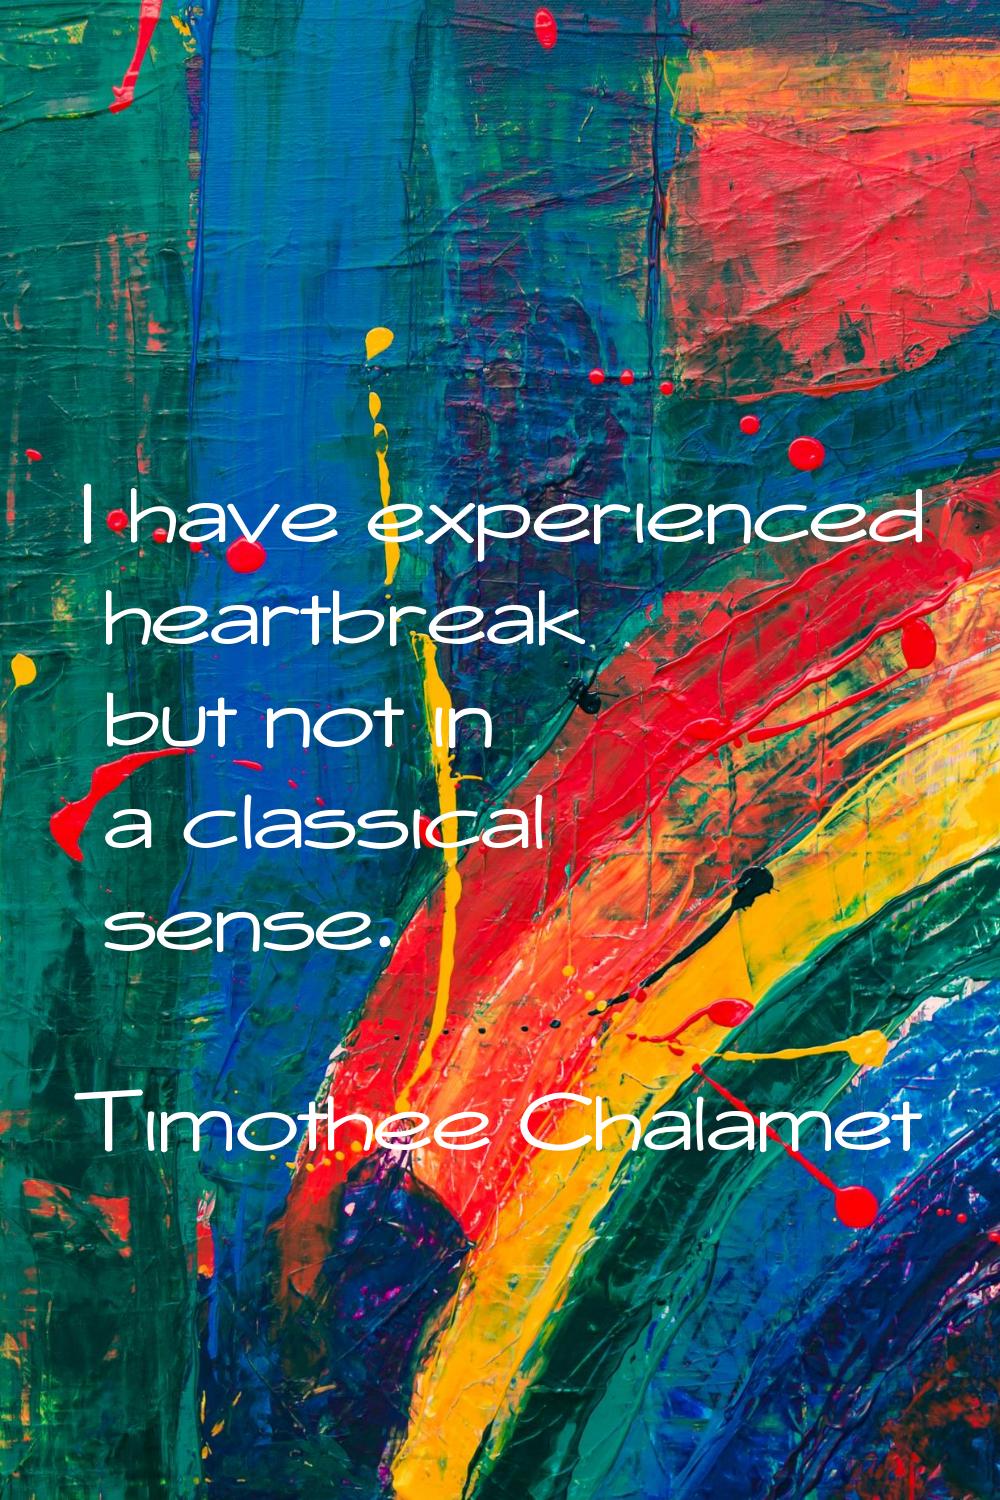 I have experienced heartbreak but not in a classical sense.